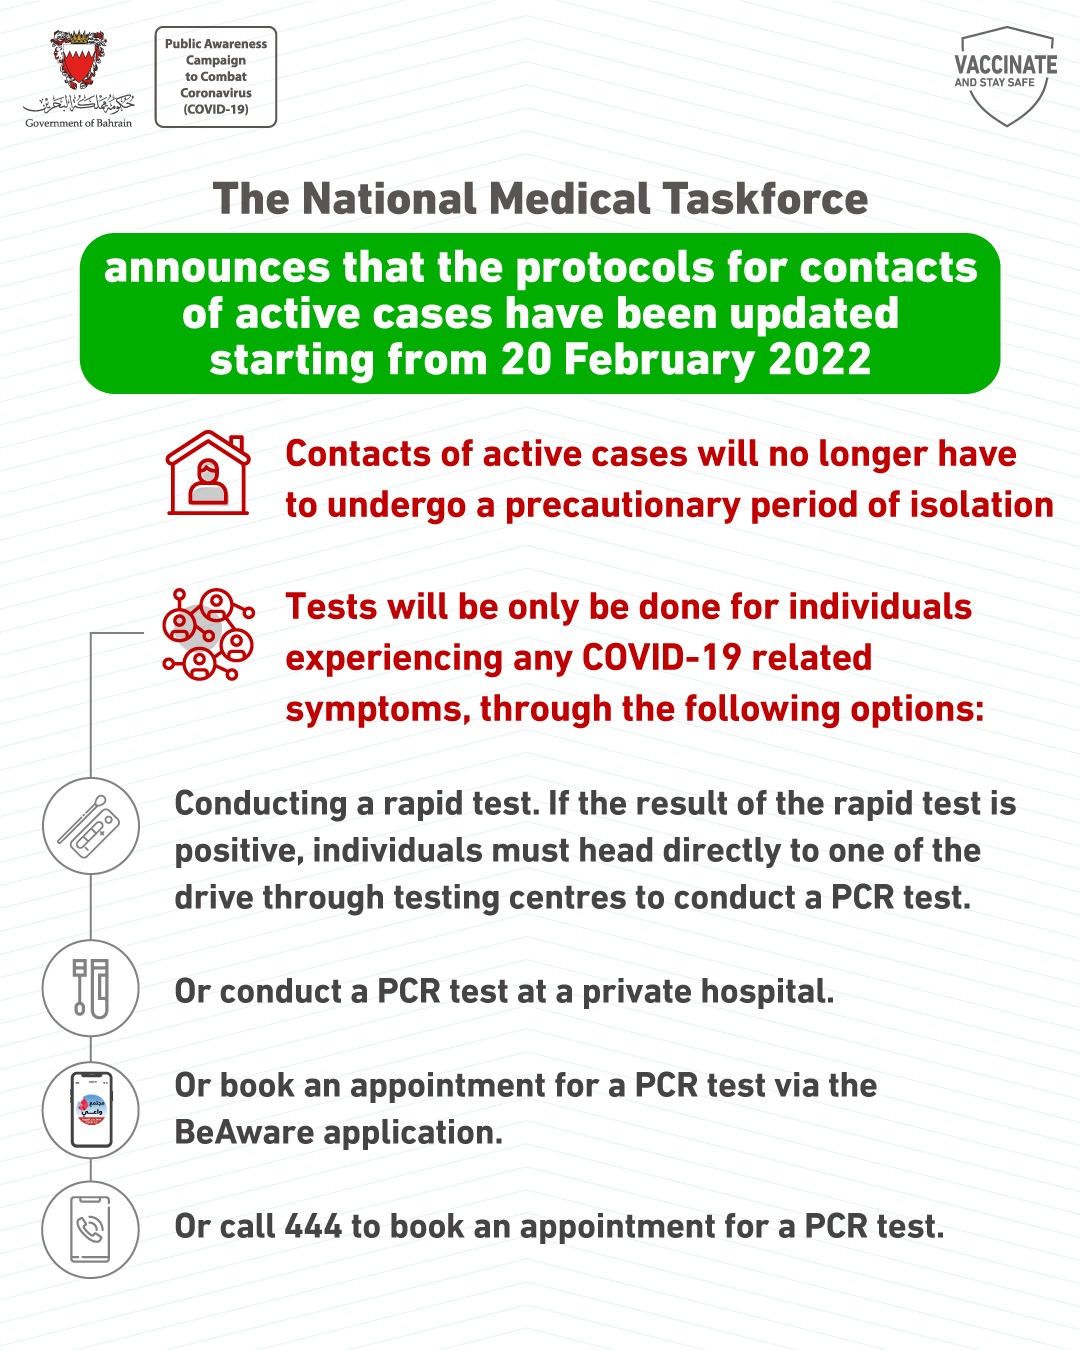 The National Medical Taskforce announces cancellation of the precautionary isolation for contacts of active cases starting from 20 February 2022